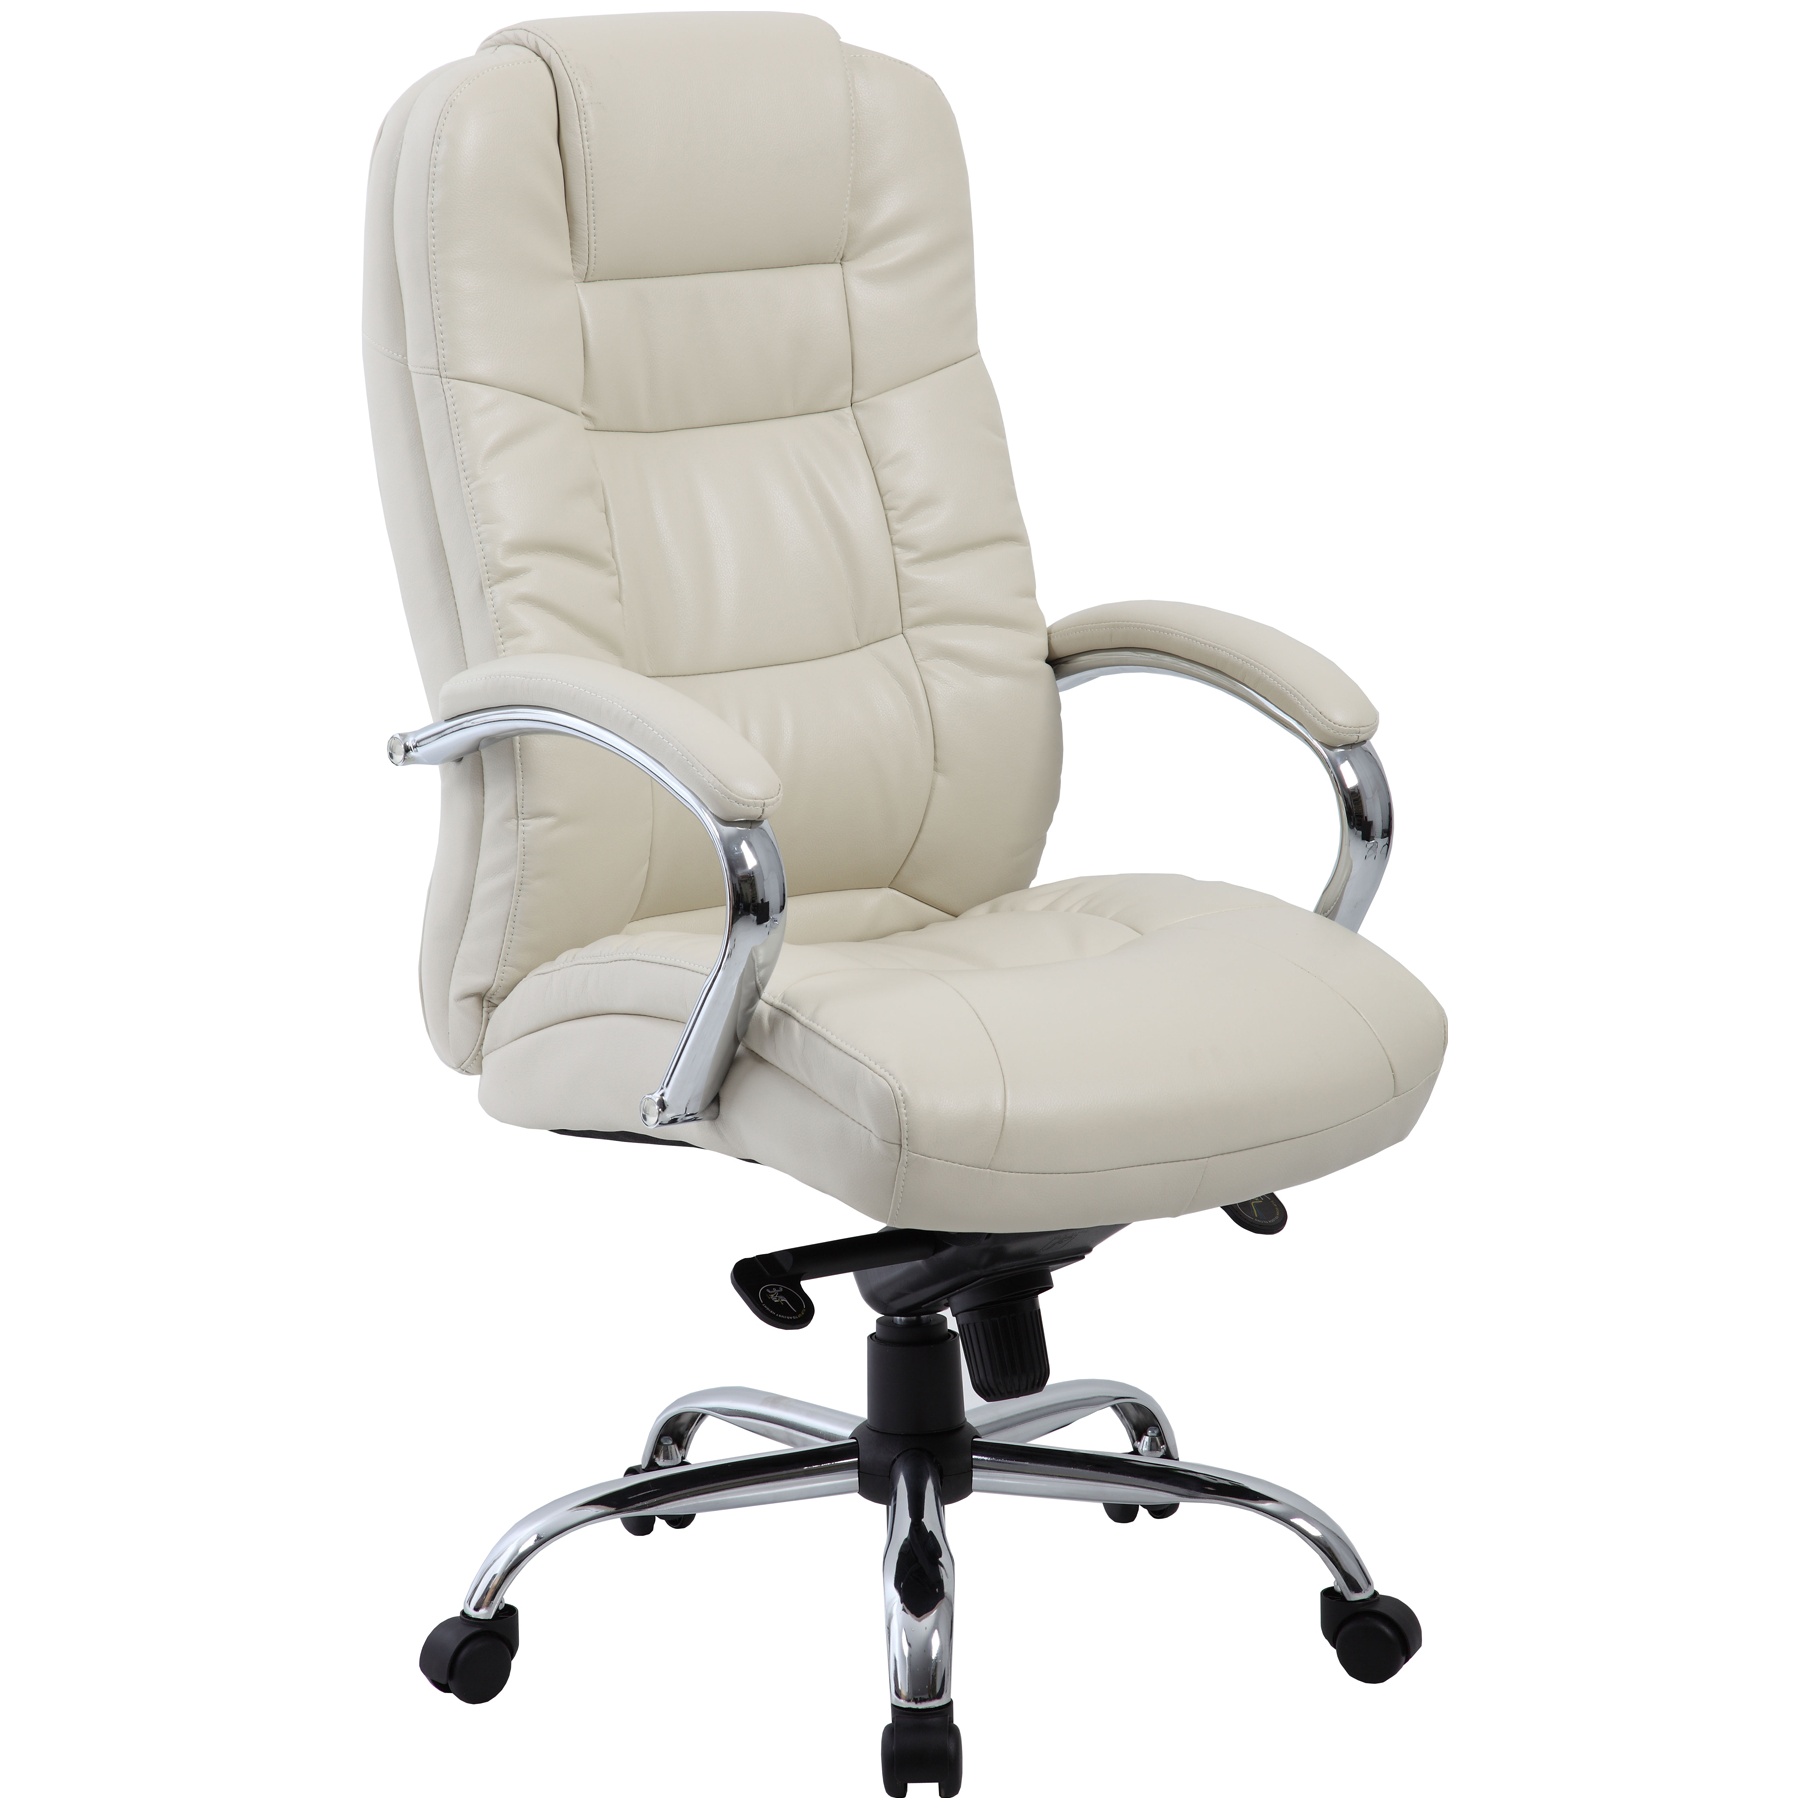 Verona Cream Executive Leather Office Chair | Executive Office Chairs